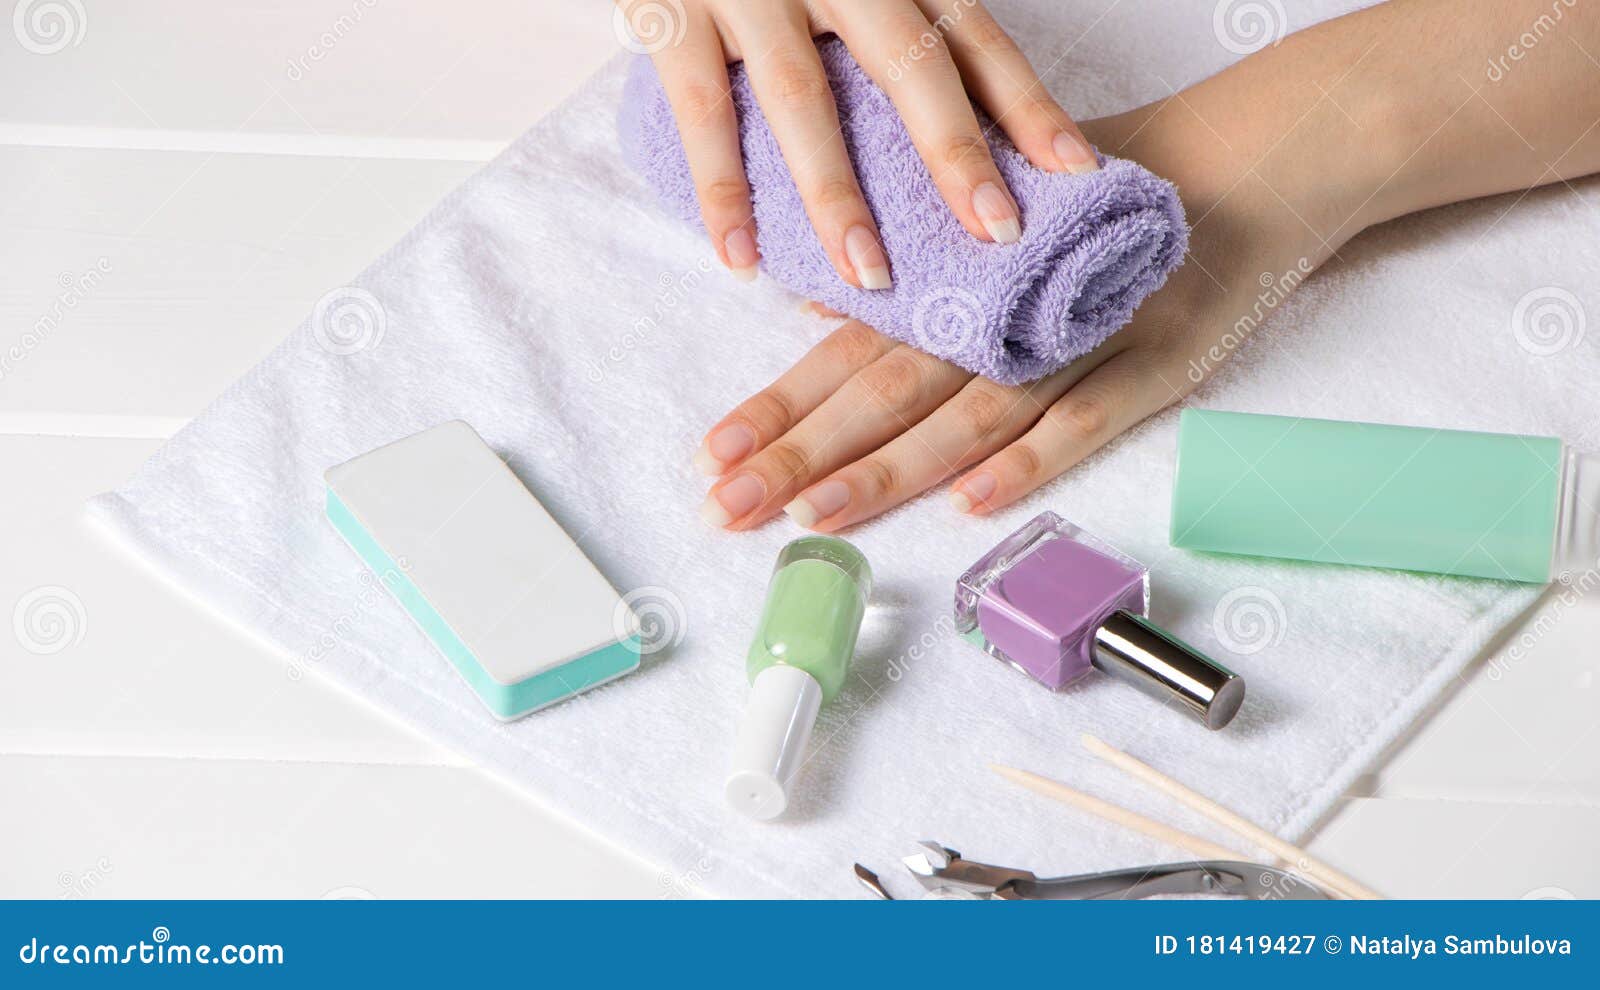 Manicure. the Woman Wipes Her Hand with a Towel. Manicure Tools, Nail  Polishes. Home Nail Care, SPA, Beauty. Long Natural Nails Stock Image -  Image of holding, fingernail: 181419427